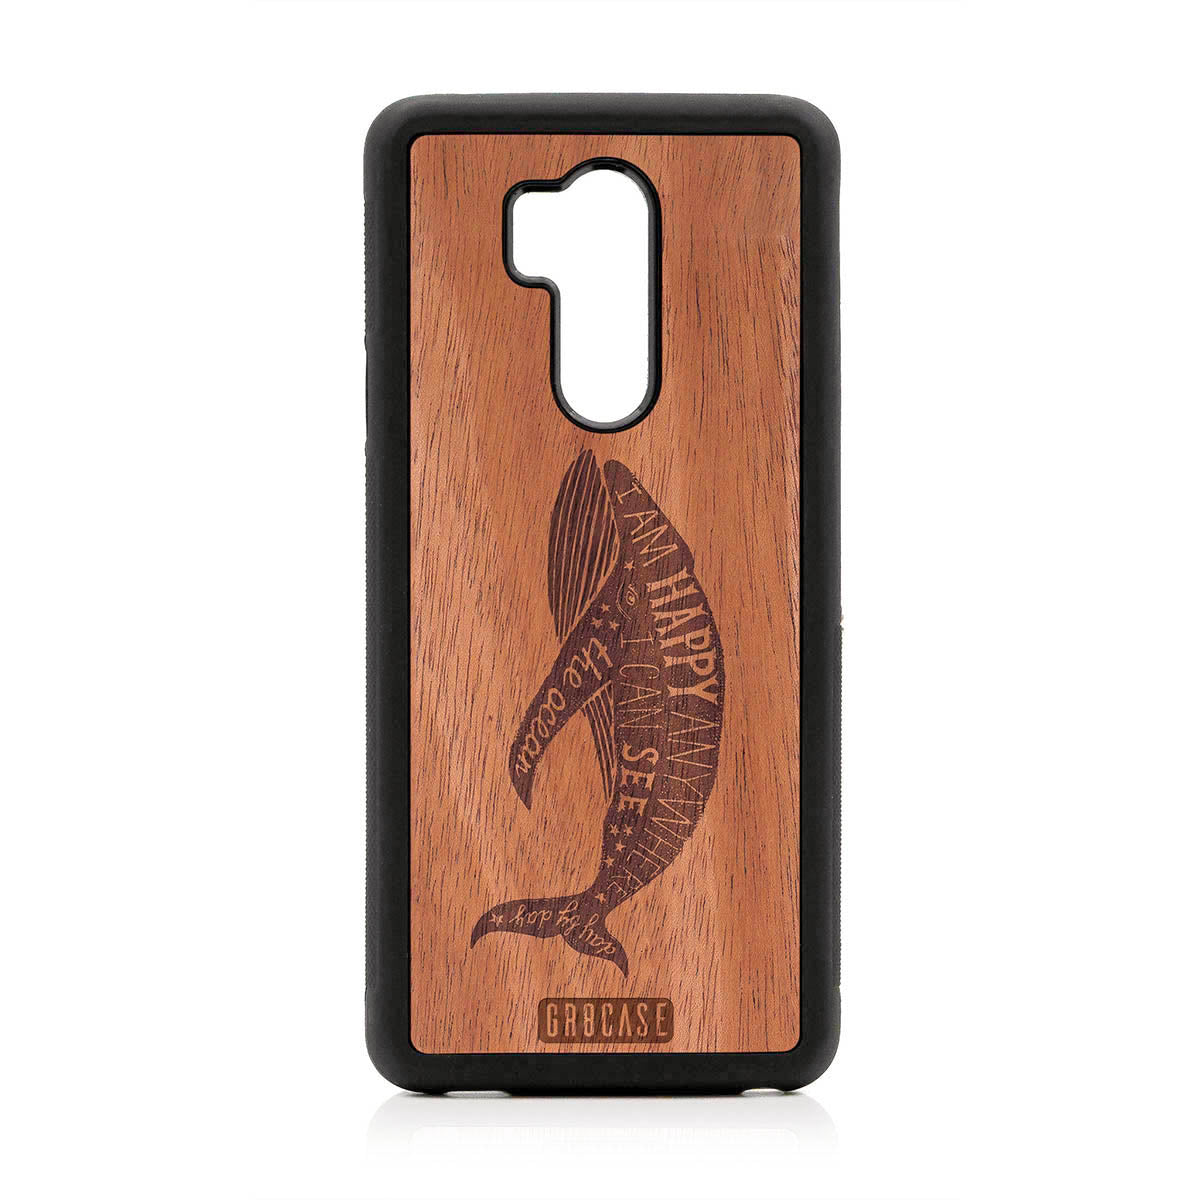 I'm Happy Anywhere I Can See The Ocean (Whale) Design Wood Case For LG G7 ThinQ